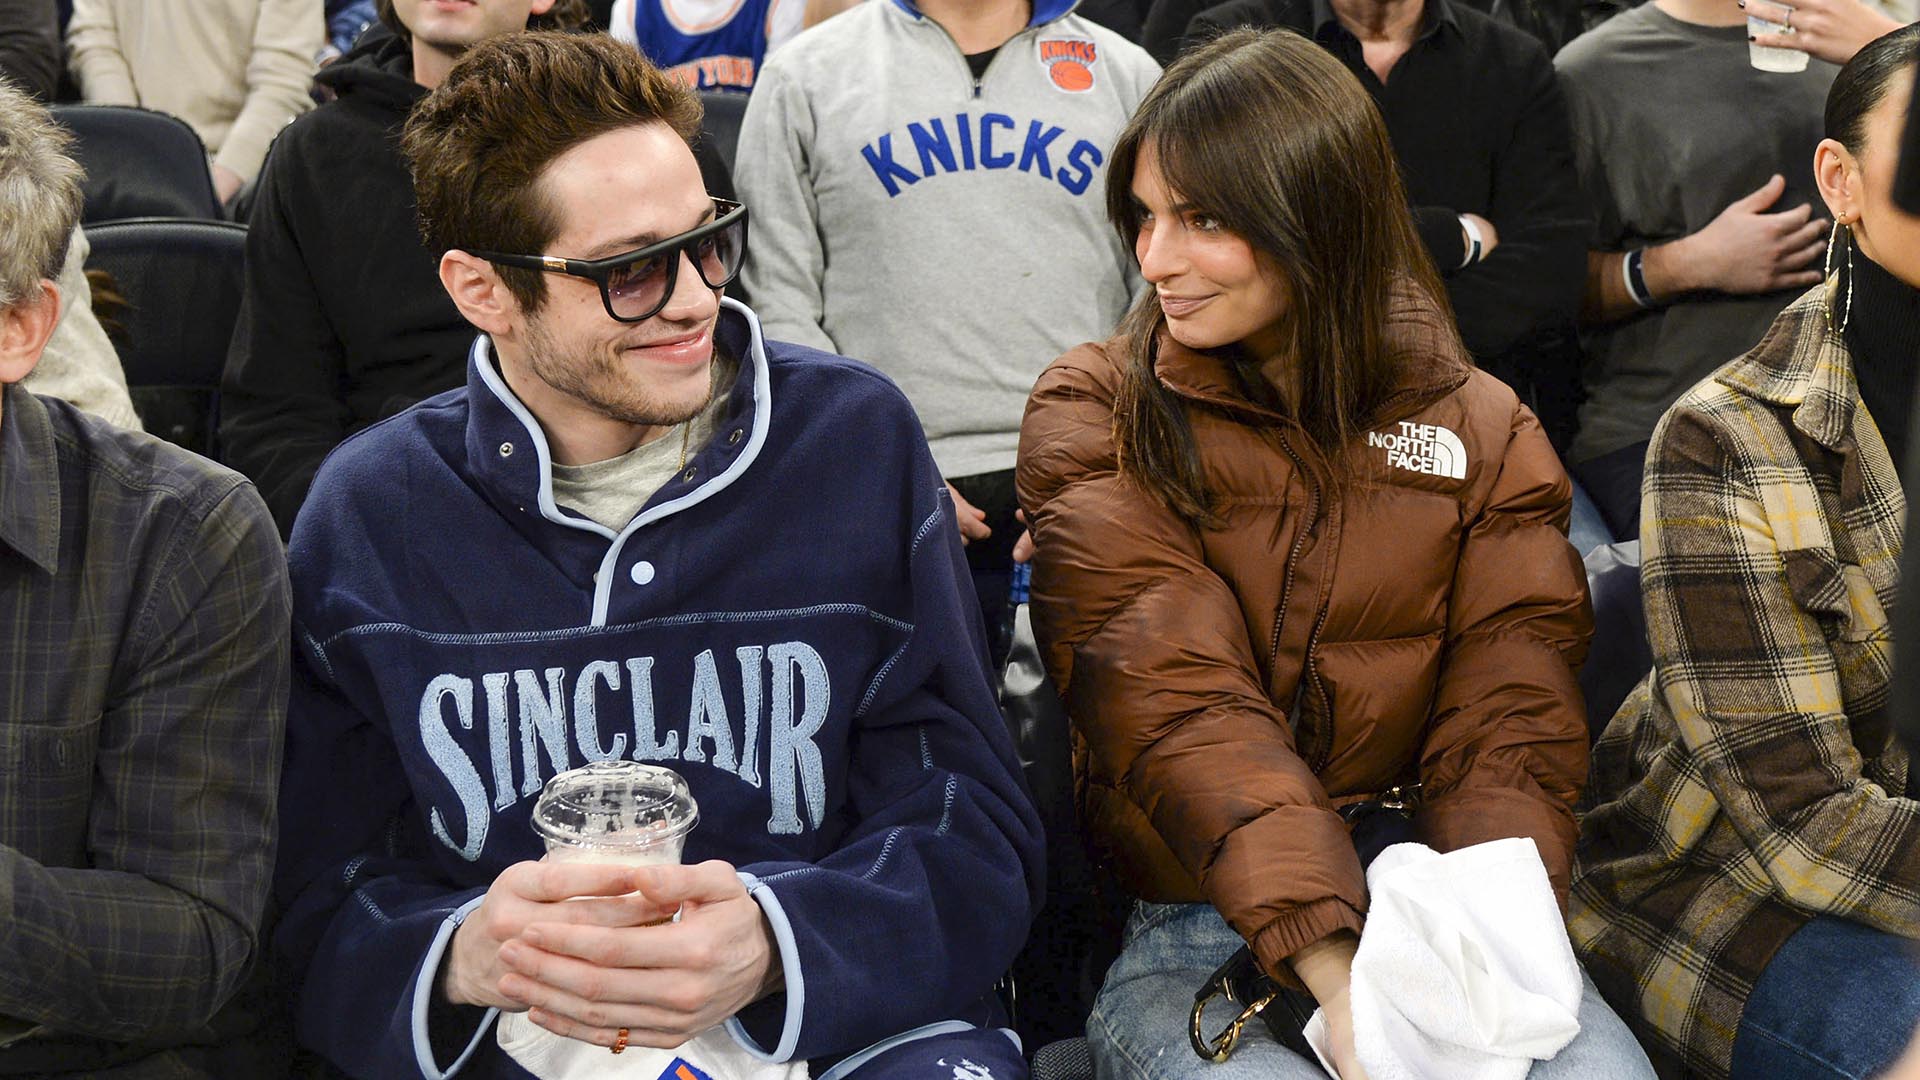 Photo © 2022 REX Features/Shutterstock /The Grosby Group

27 NOVEMBER 2022

New York, NY  - Pete Davidson and Emily Ratajkowski are all smiles as they attend the Grizzlies vs Knicks game at Madison Square Garden together.****

Pete Davidson y Emily Ratajkowski sonríen mientras asisten juntos al juego Grizzlies vs Knicks en el Madison Square Garden.